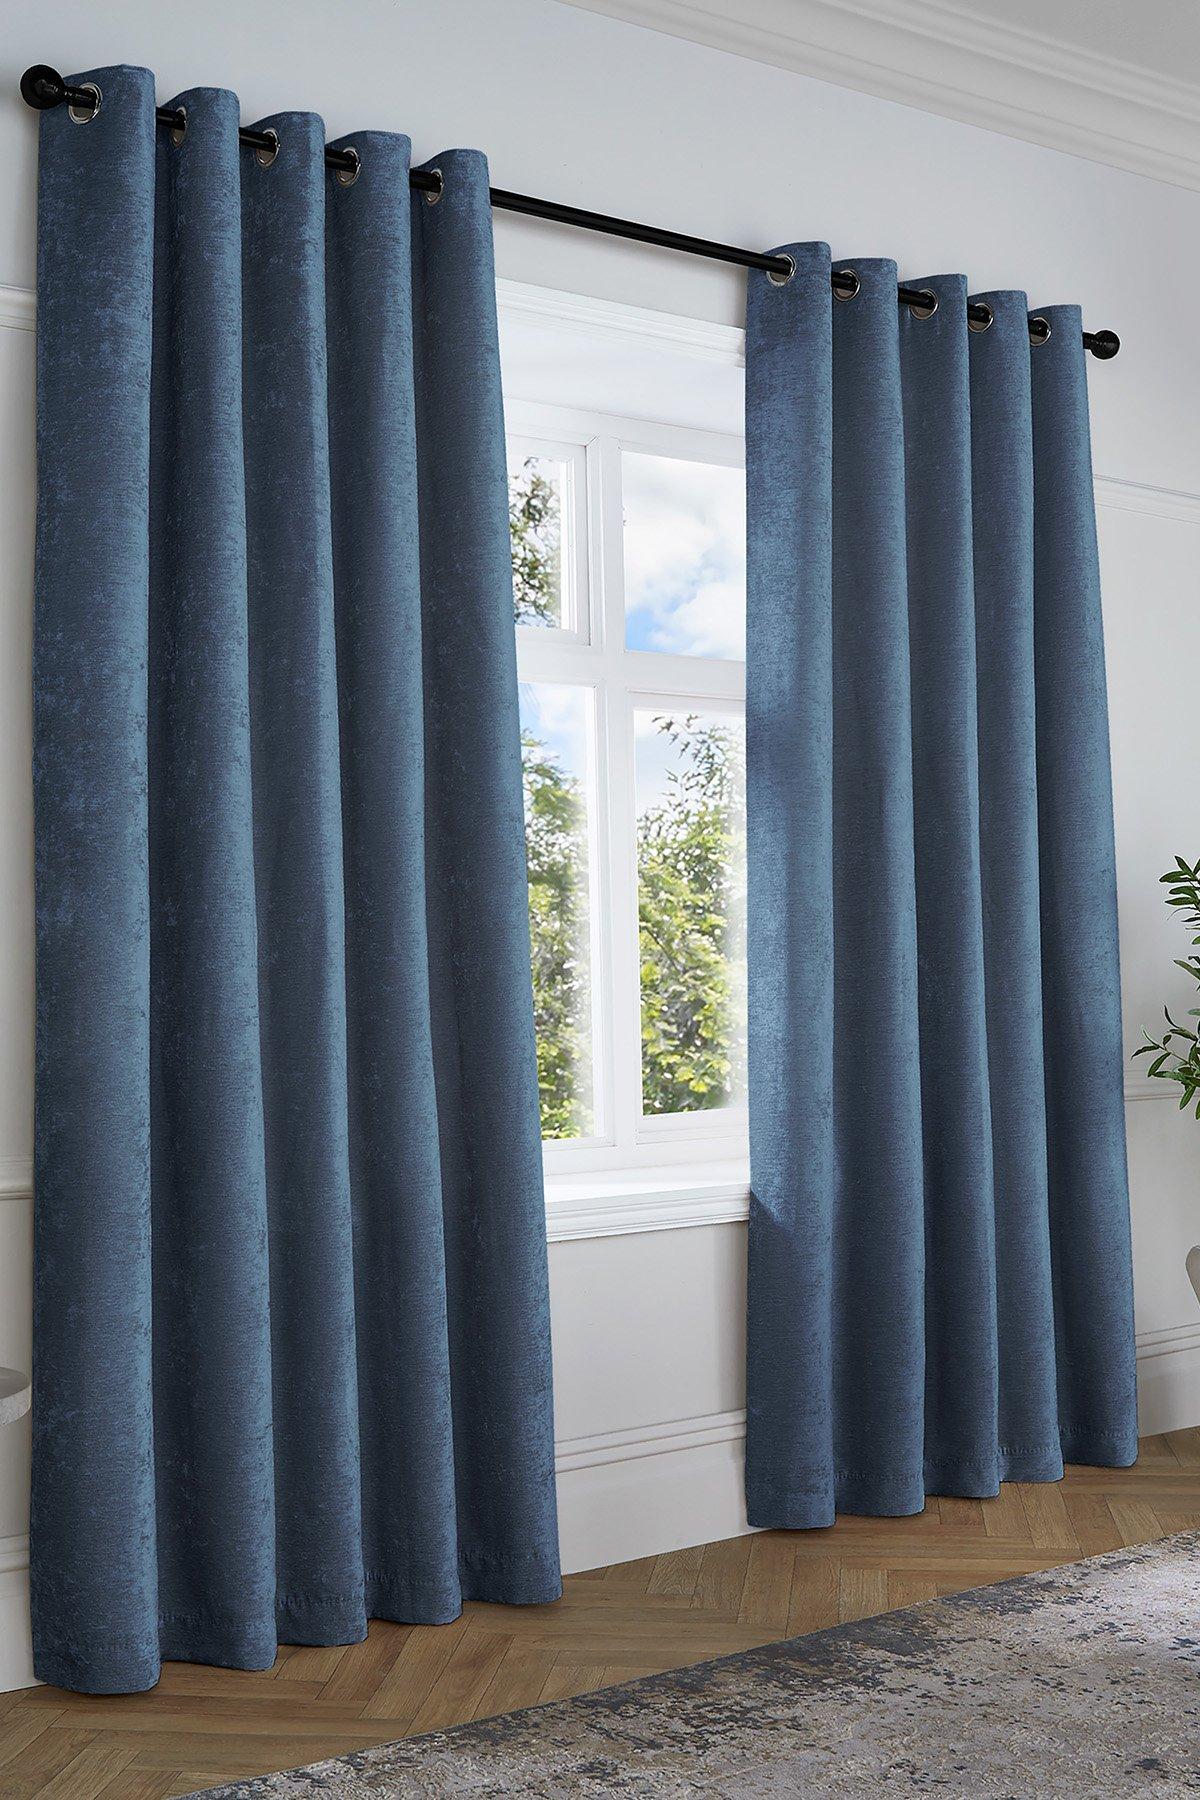 'Textured Chenille' Textured Pair of Eyelet Curtains